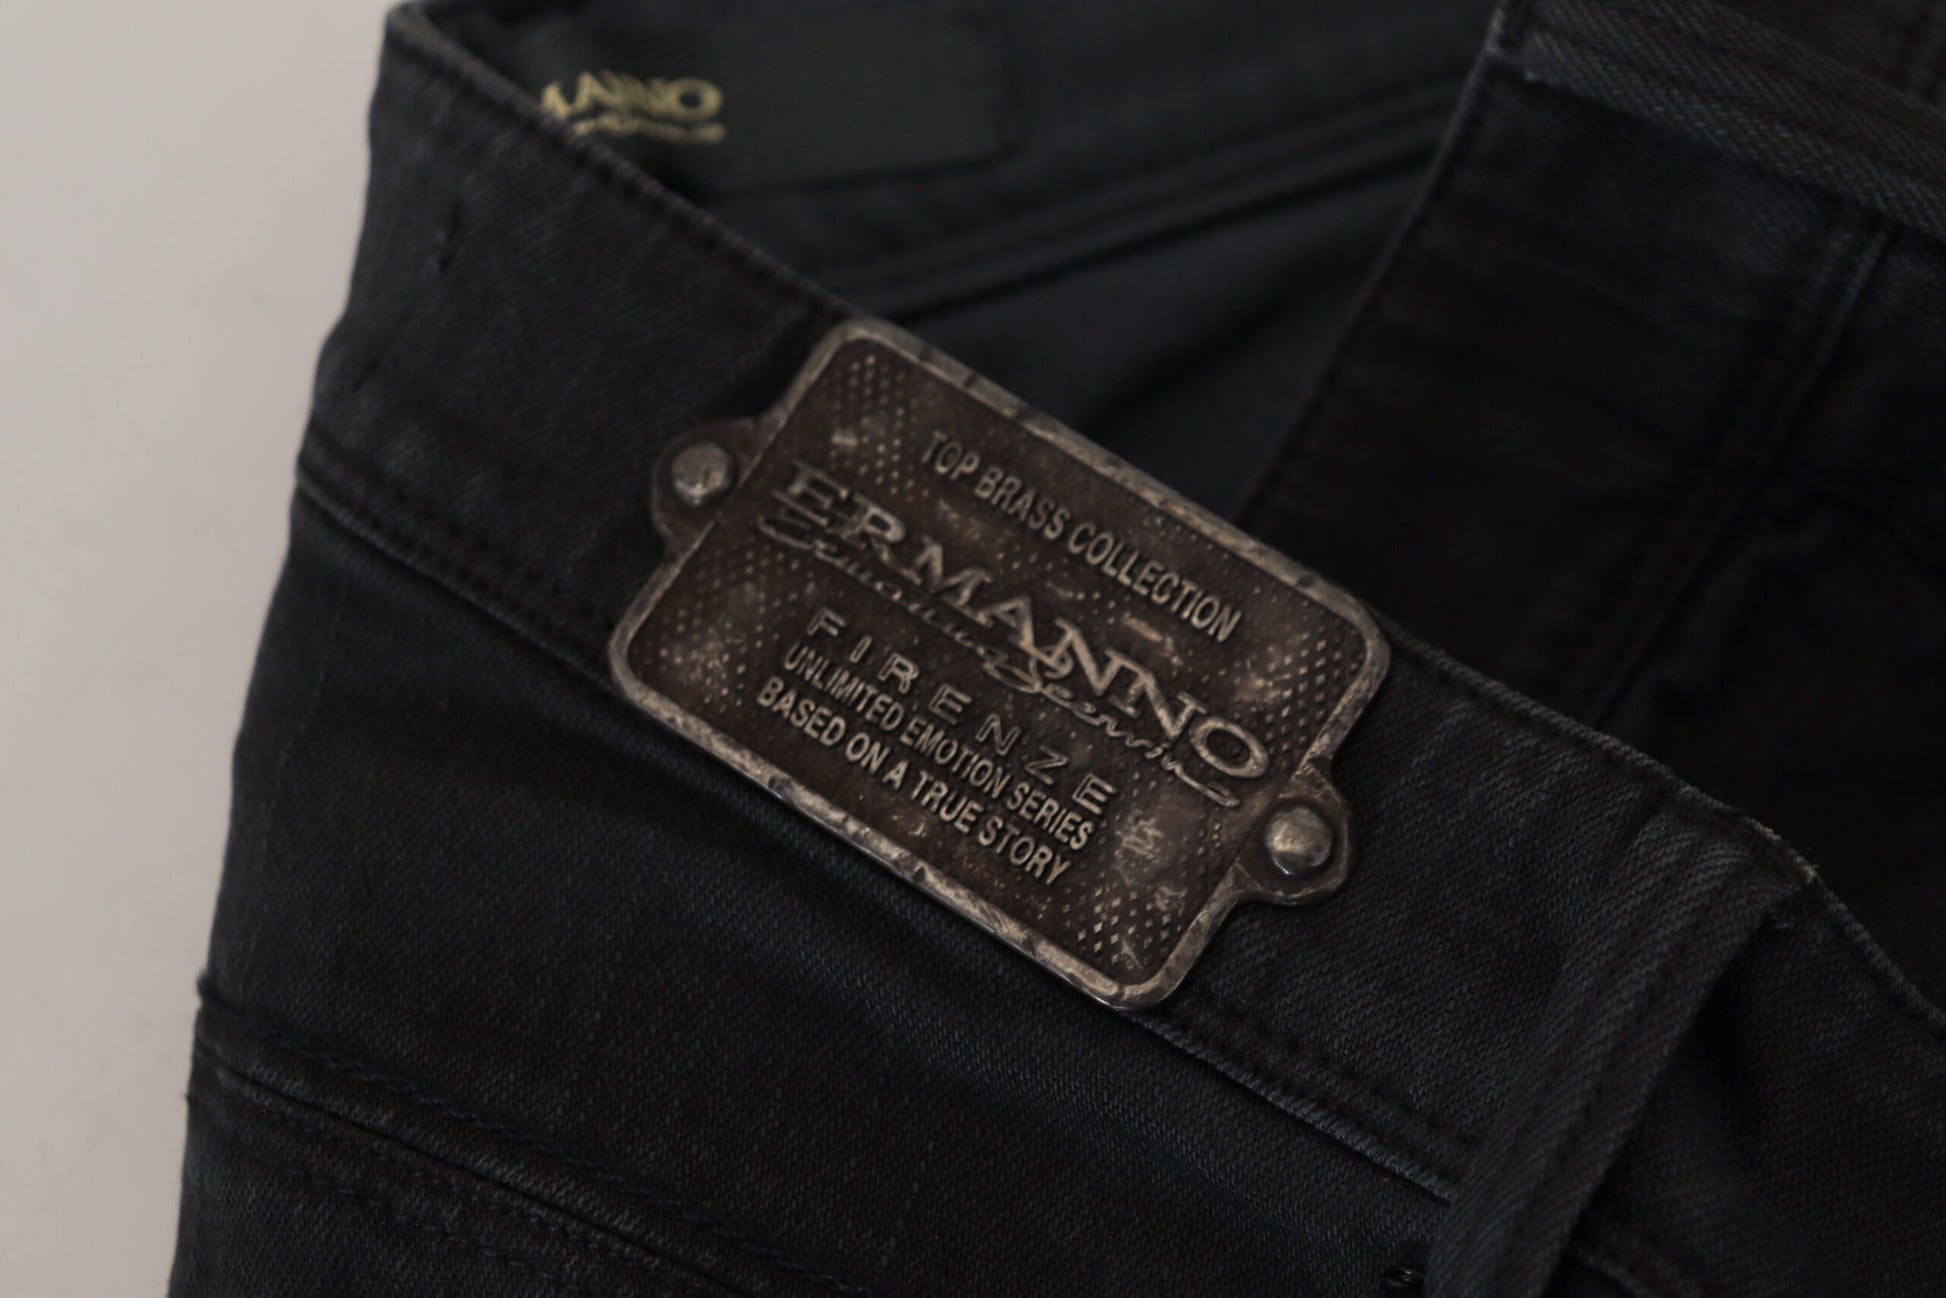 Ermanno Scervino Black Cotton Slim Fit Women Denim Jeans - Designed by Ermanno Scervino Available to Buy at a Discounted Price on Moon Behind The Hill Online Designer Discount Store